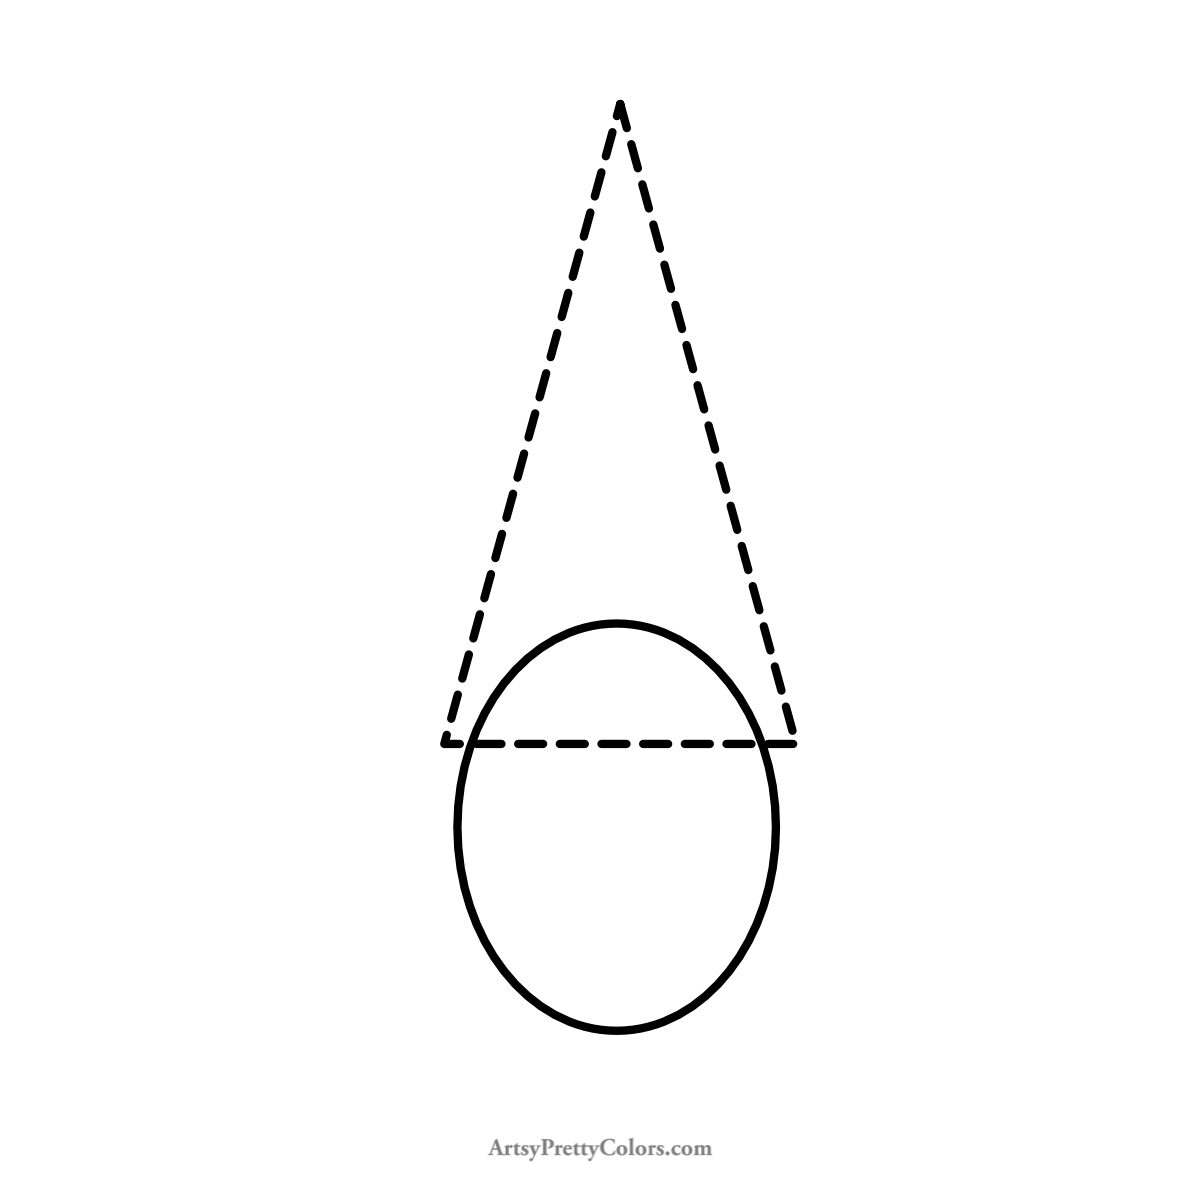 a triangle drawn over the oval to make the gnome's hat